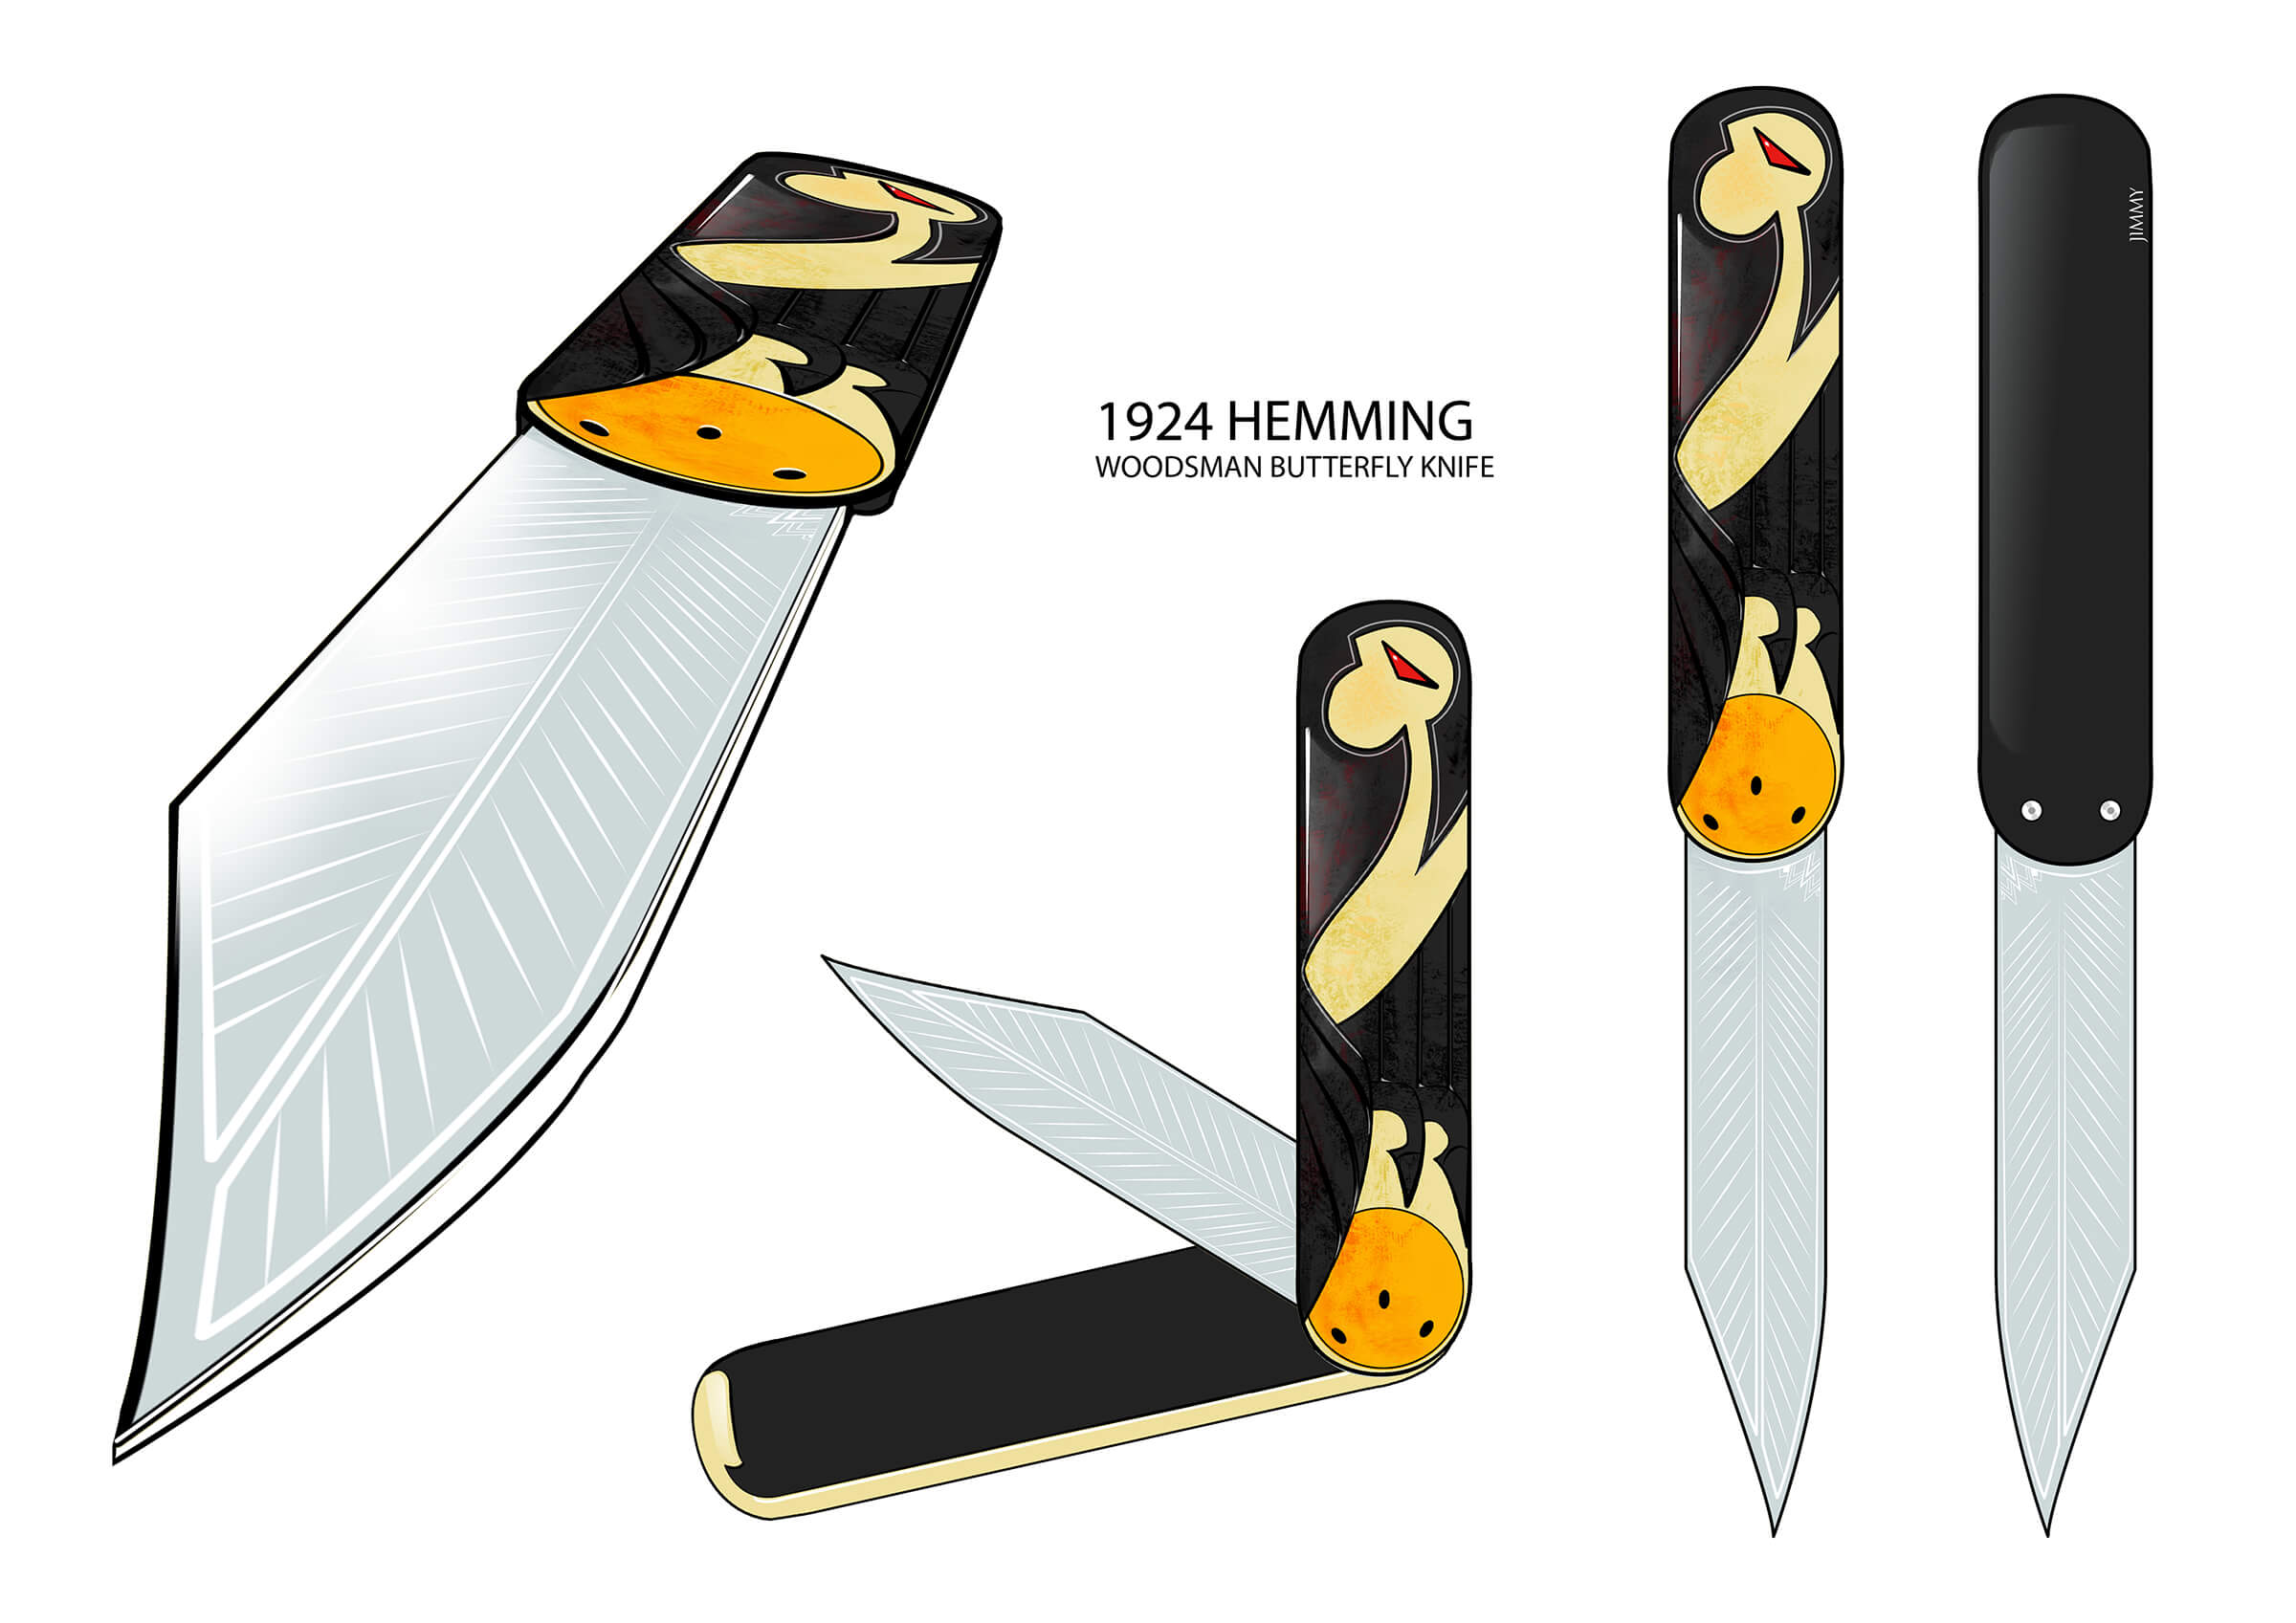 Close-up detail paintings of a butterfly knife featuring and ornate black-orange-and-yellow grip, and leaf-etched blade.